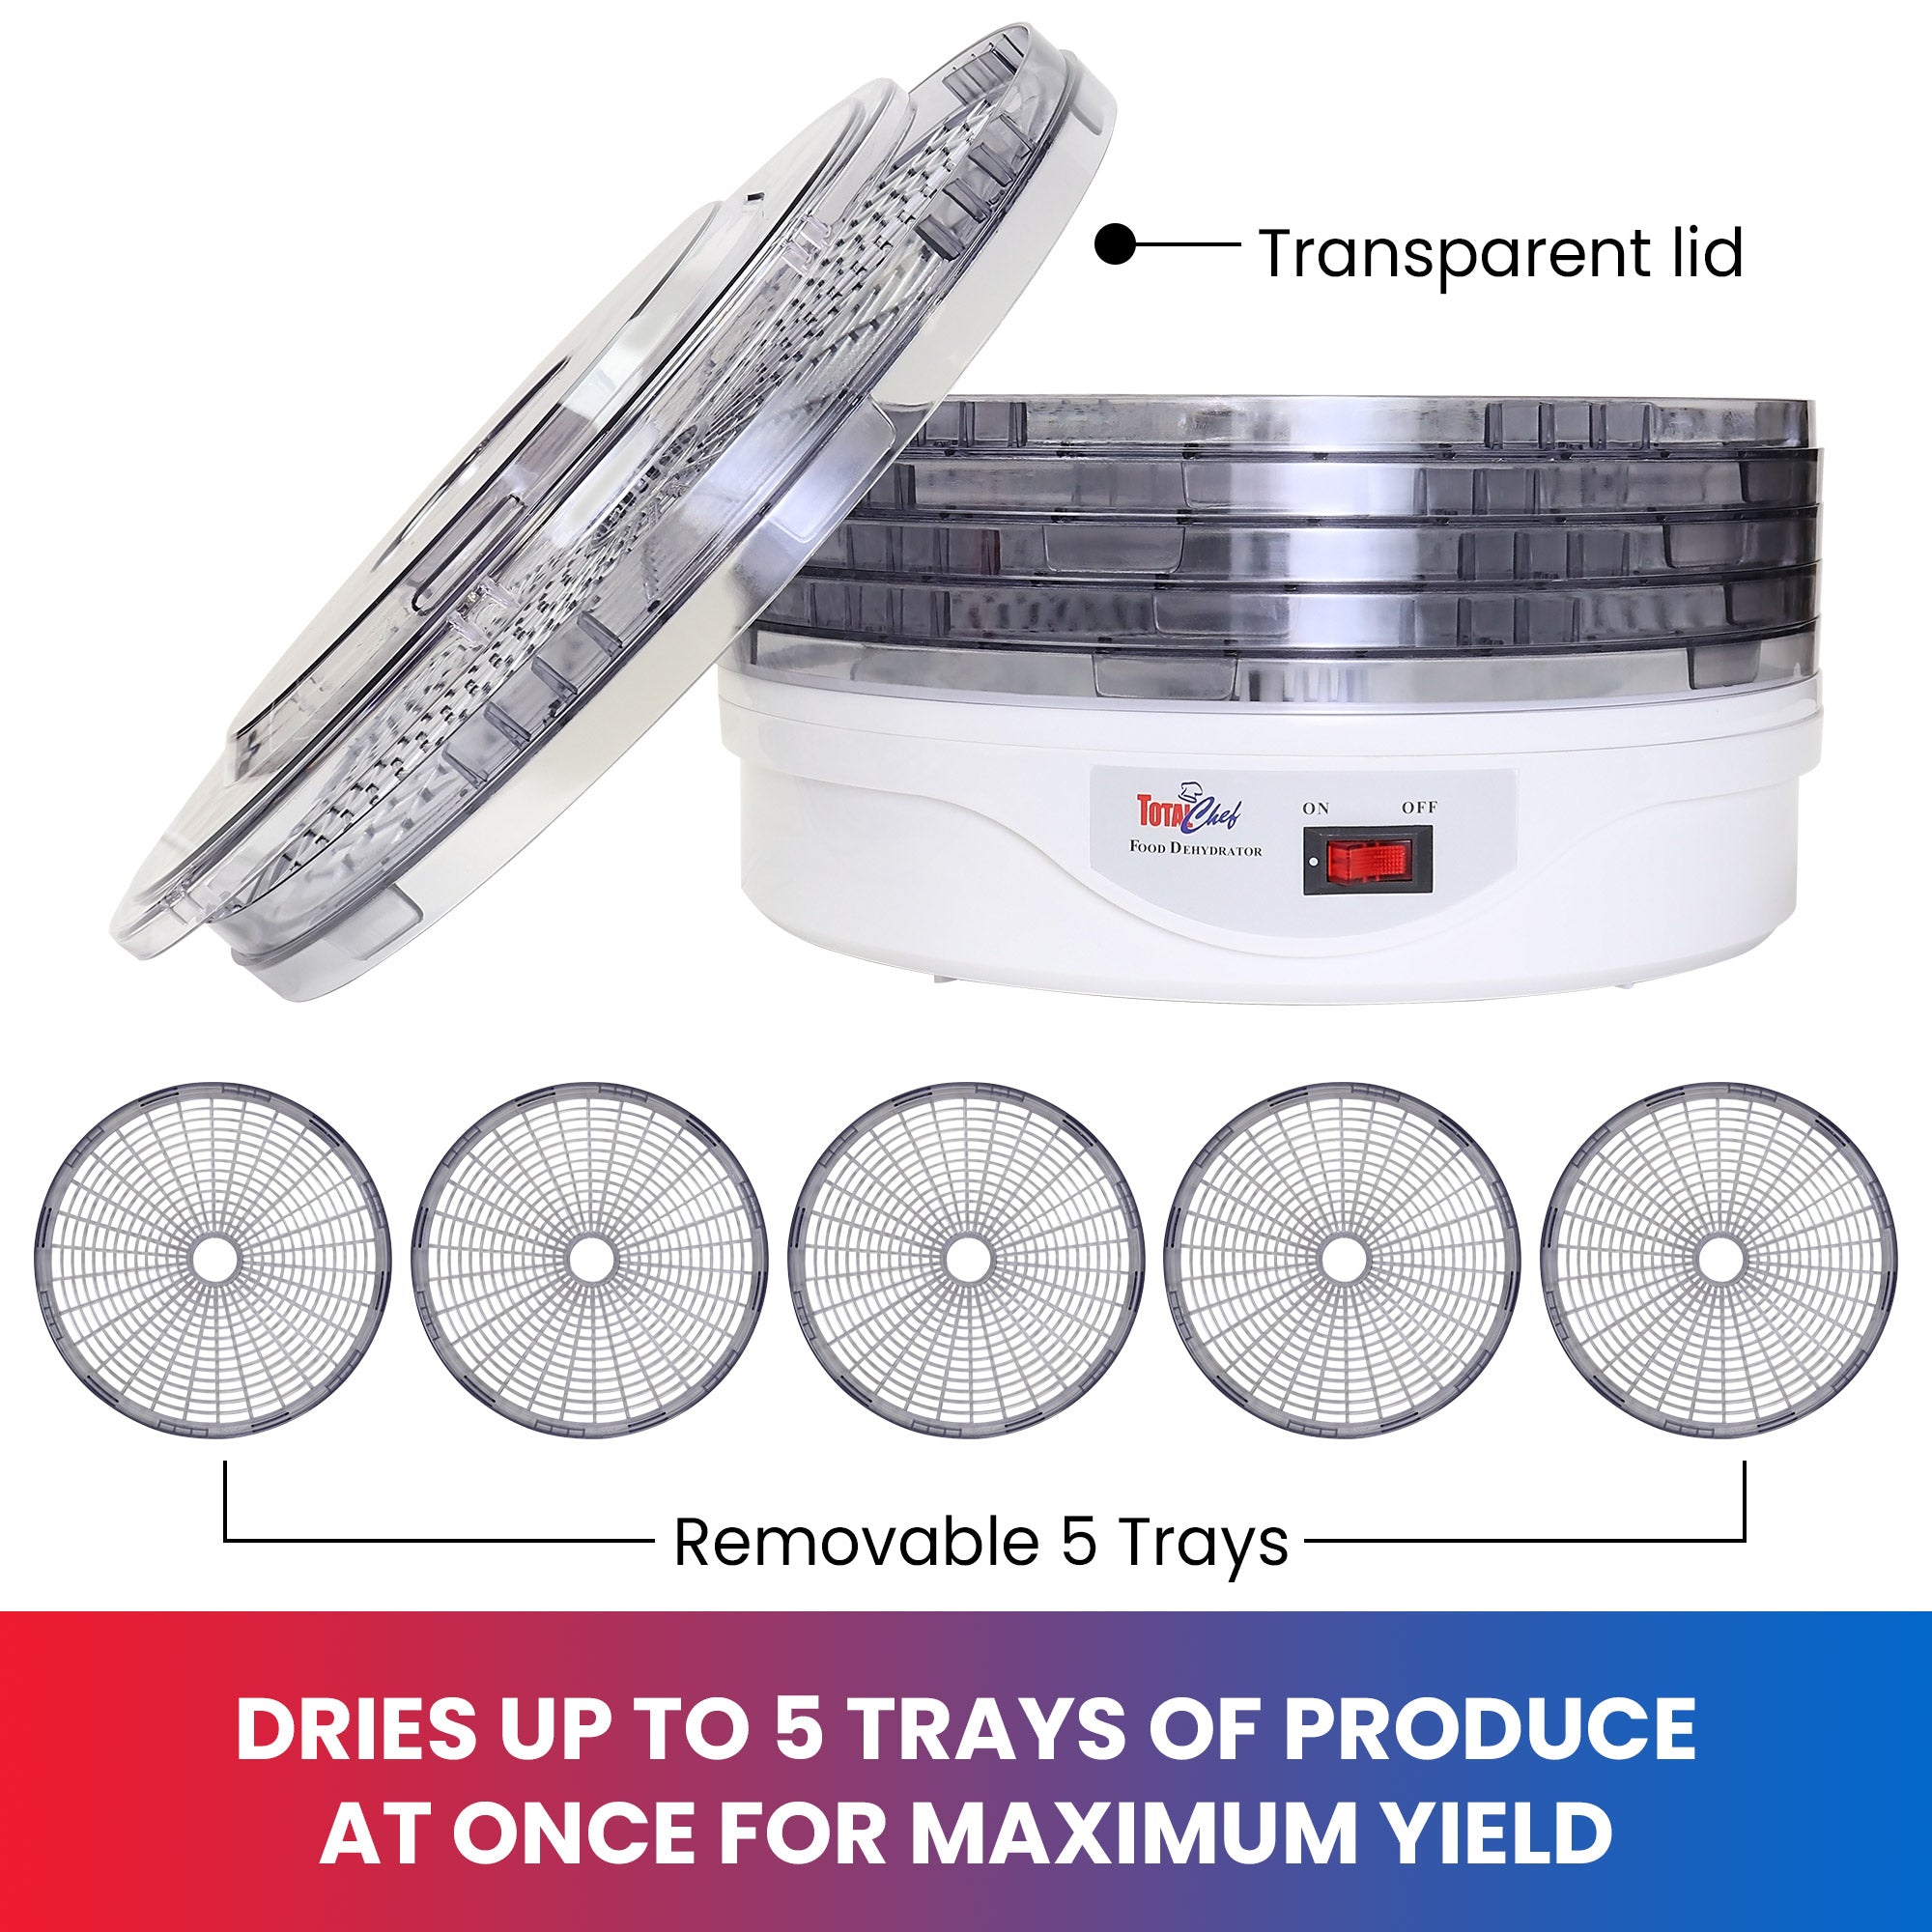 Product shot on white background of food dryer with lid leaning against it above product shots of the individual trays in a row, labeled. Text below reads "Dries up to 5 trays of produce at once for maximum yield"